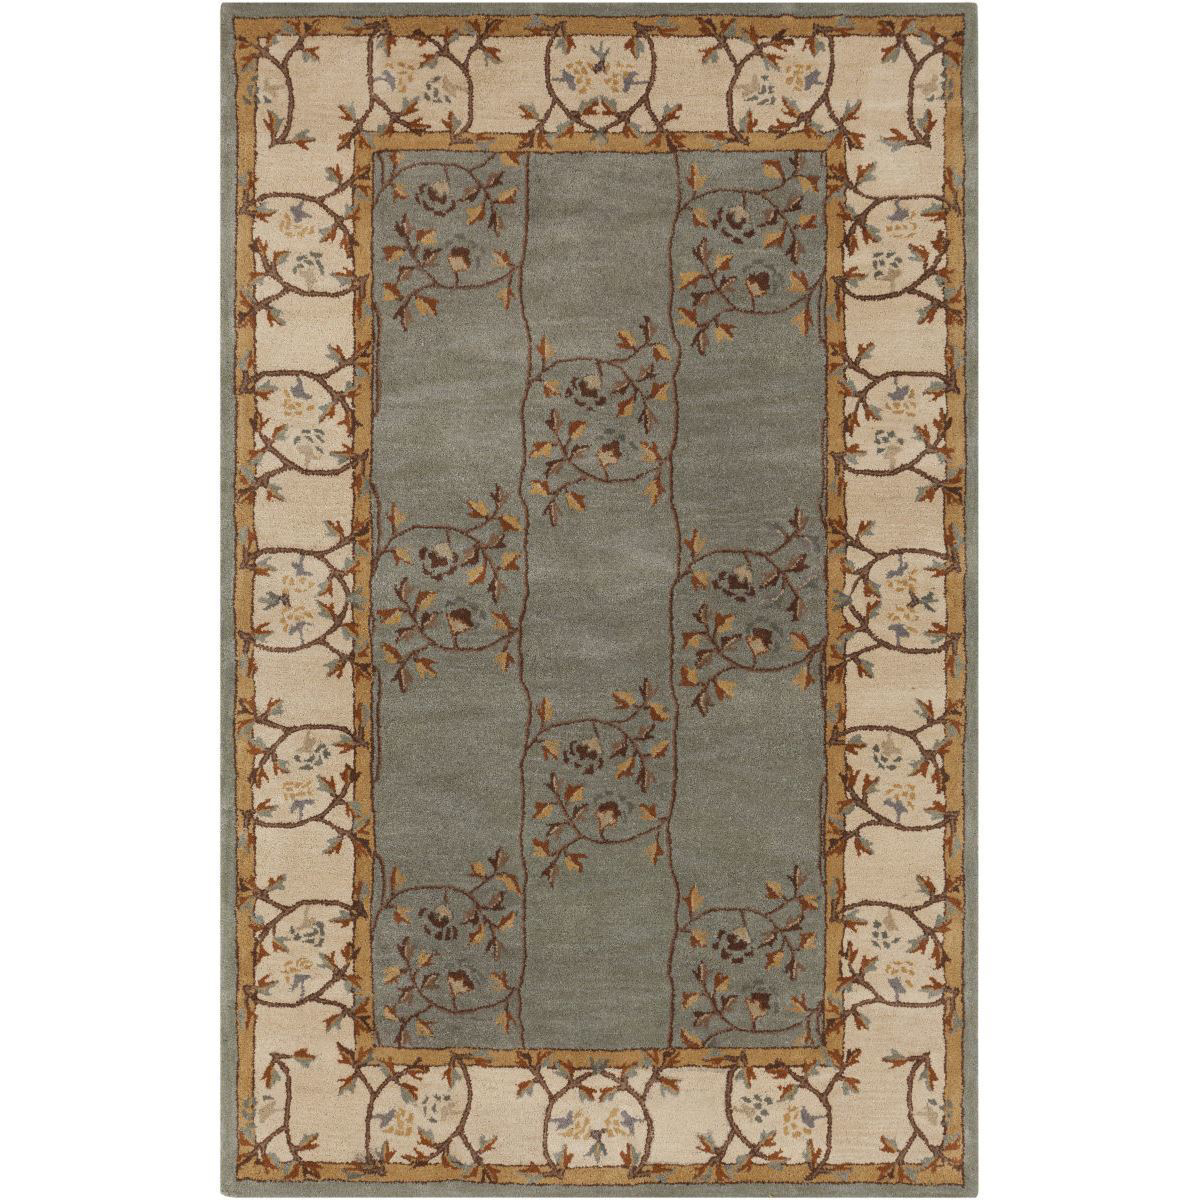 Picture of Caesar Slate Gray 5'X8' Area Rug